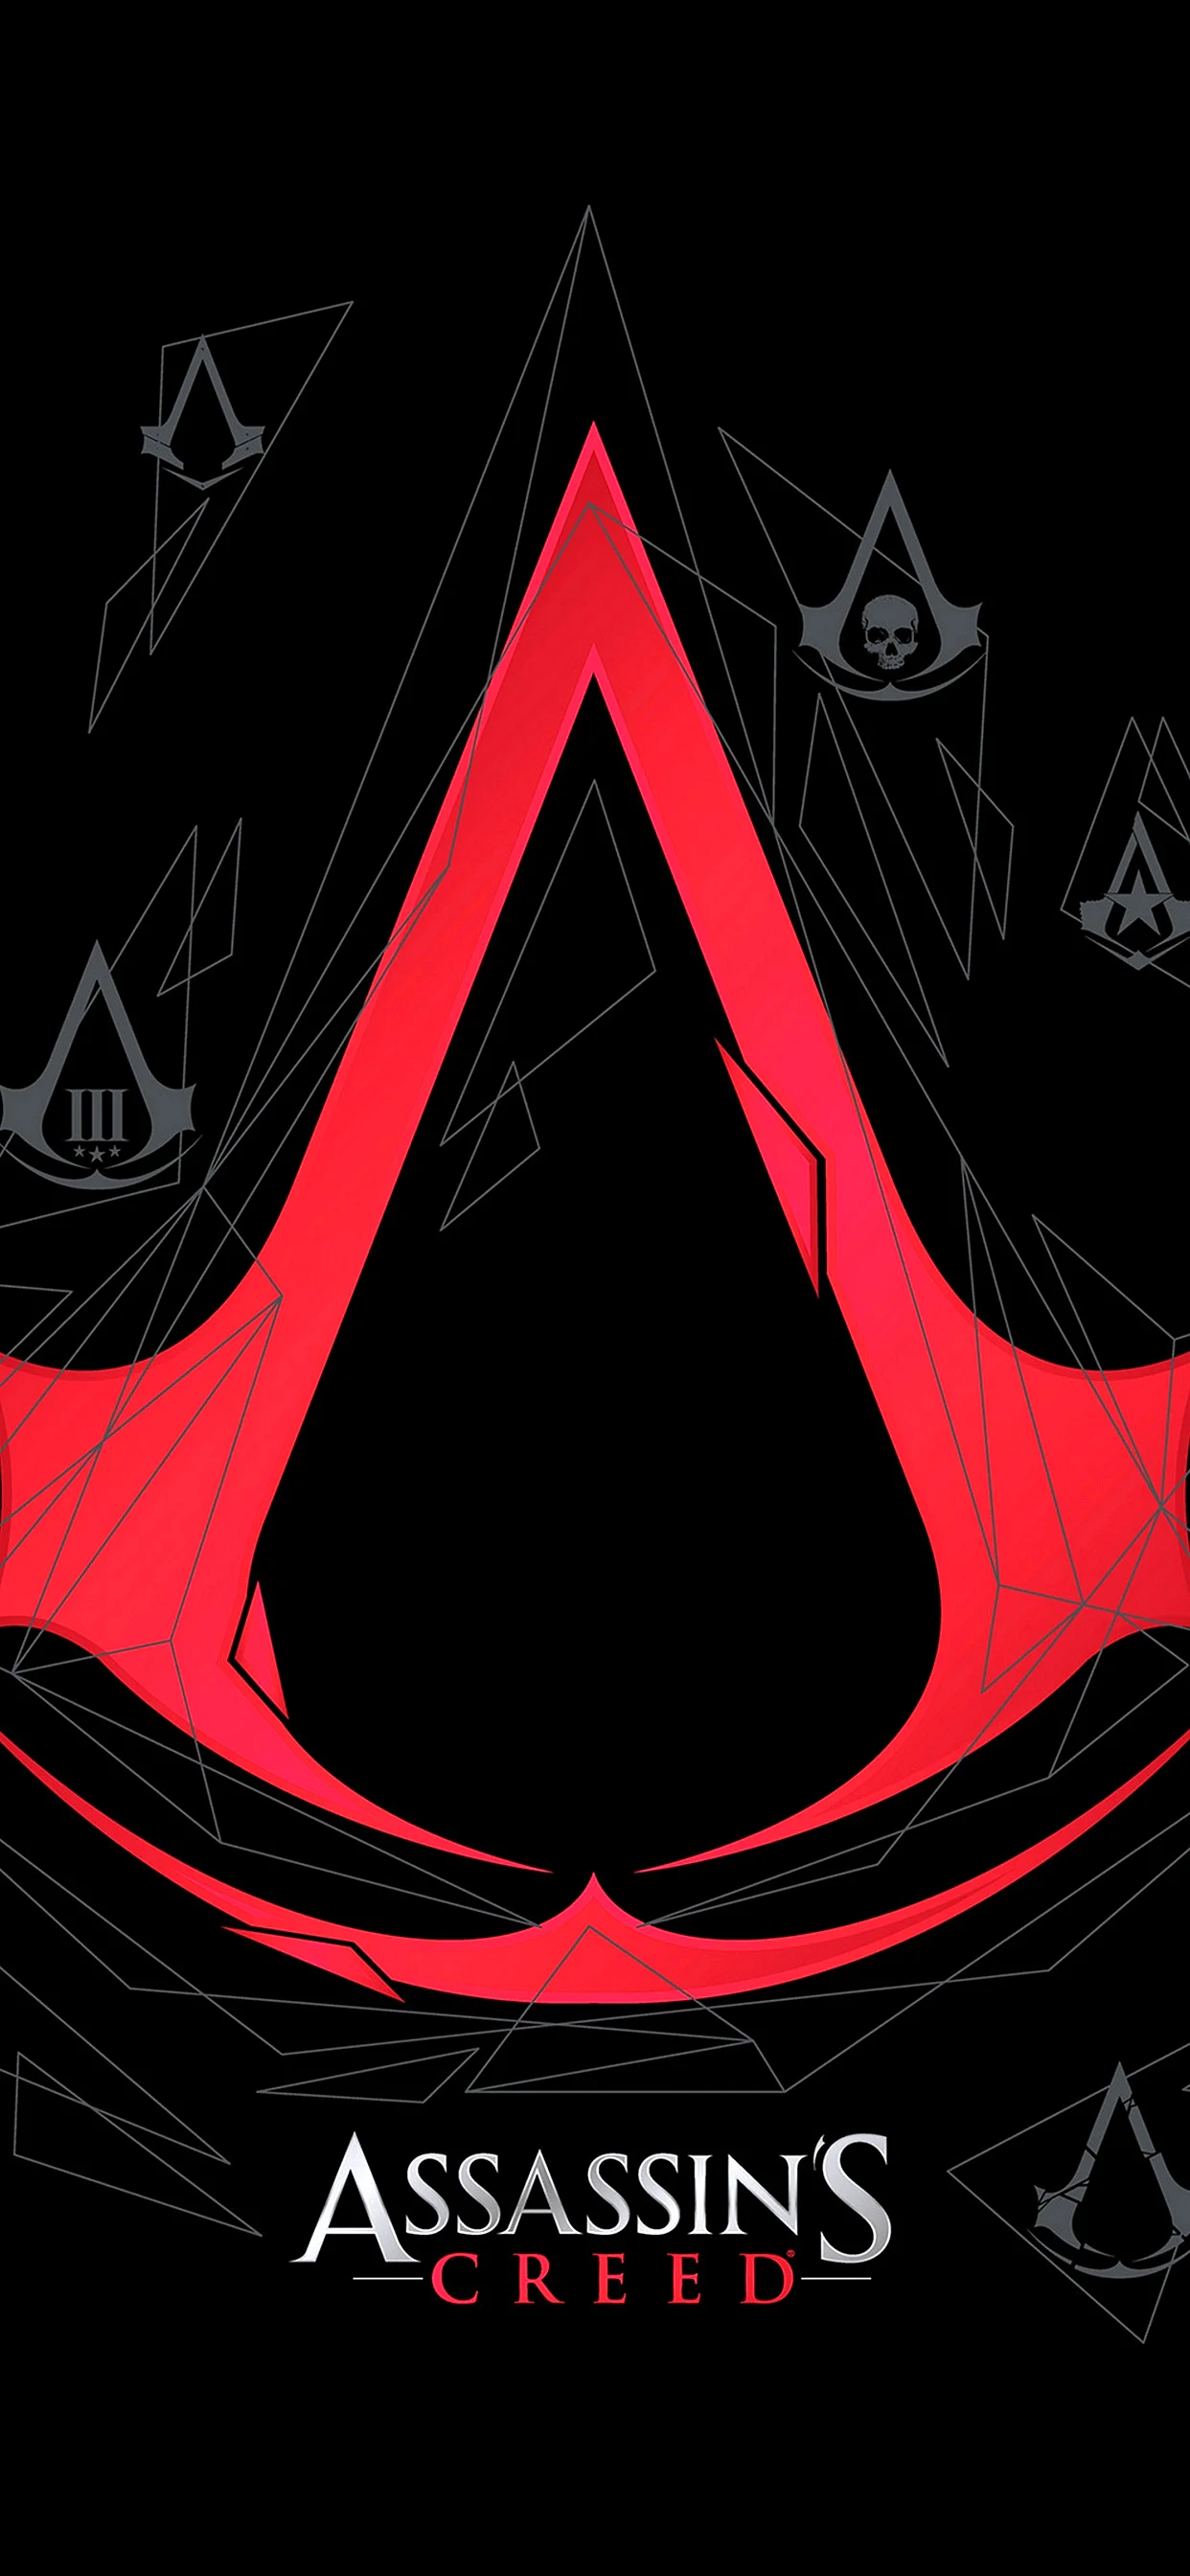 Assassins Creed Logo Wallpaper for iPhone 11 Pro Max